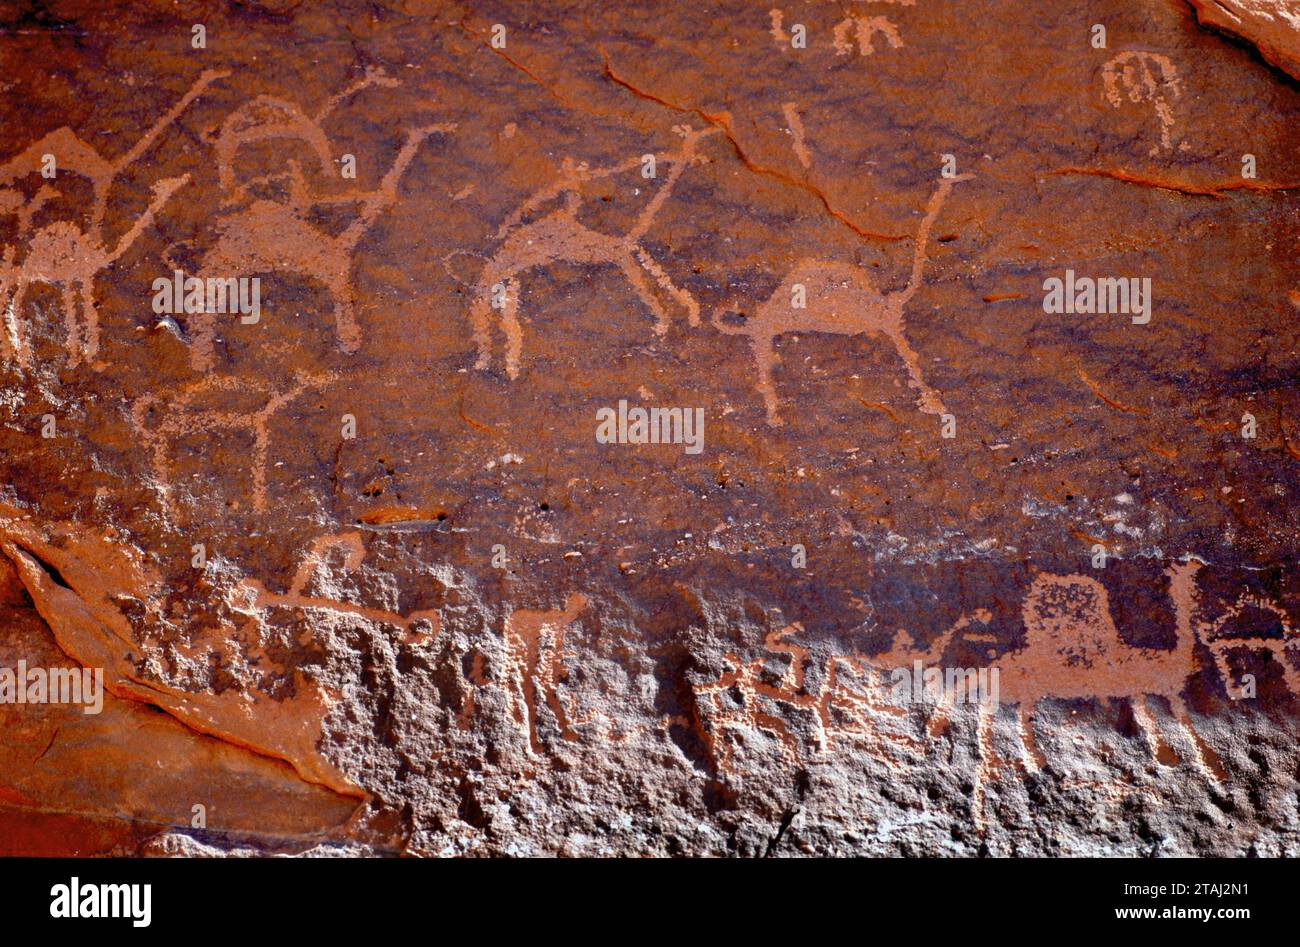 Close up frontal view of the prehistoric stone inscriptions and petroglyphs made by nomadic bedouins on the surface of red sandstone rocks of Wadi Rum Stock Photo